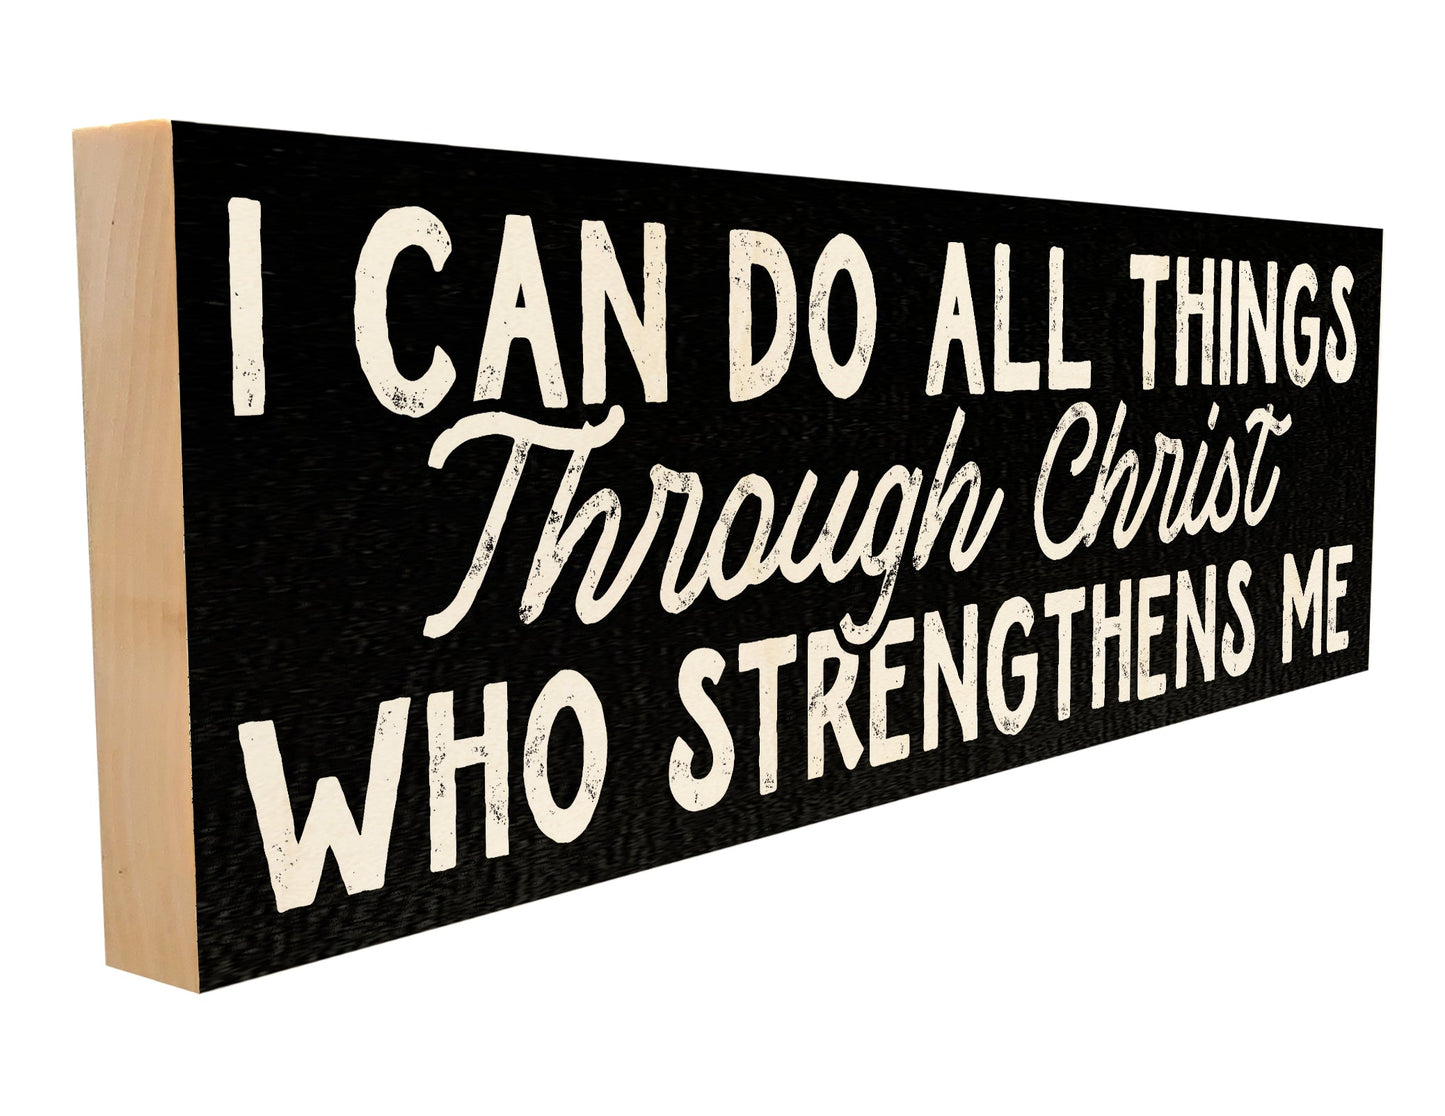 I Can Do All Things Through Christ Who Strengthens Me.